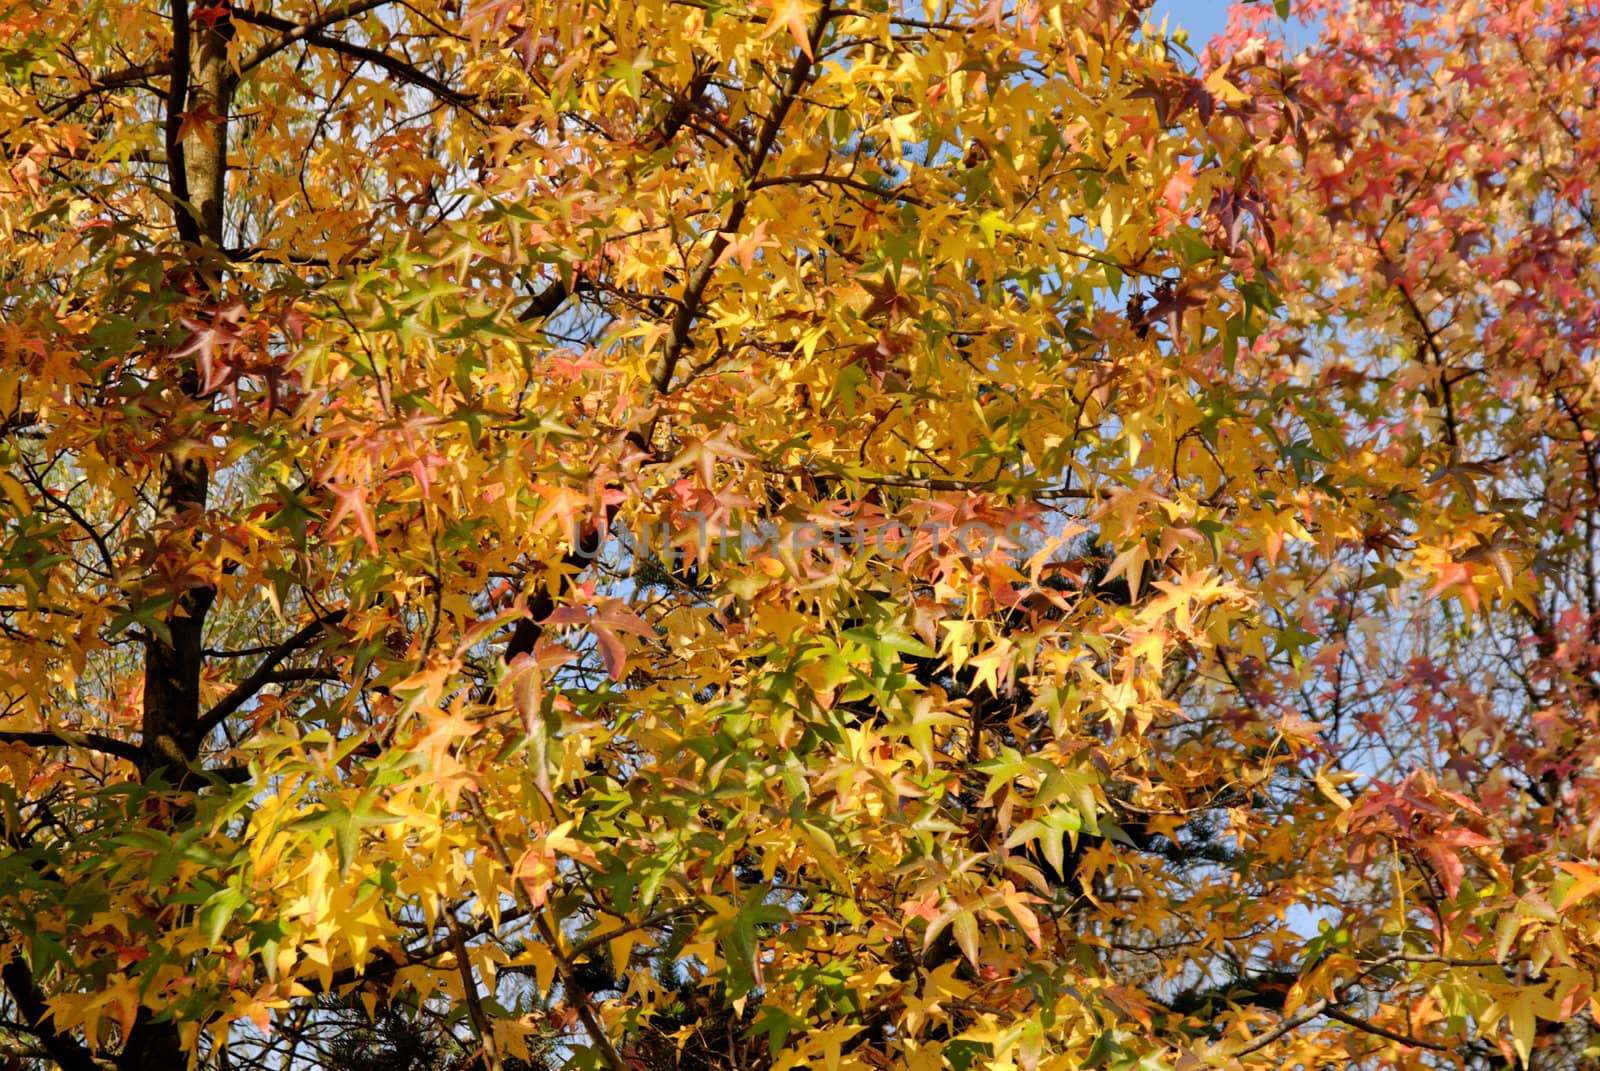 Autumn leaves on the branches of tree in the park